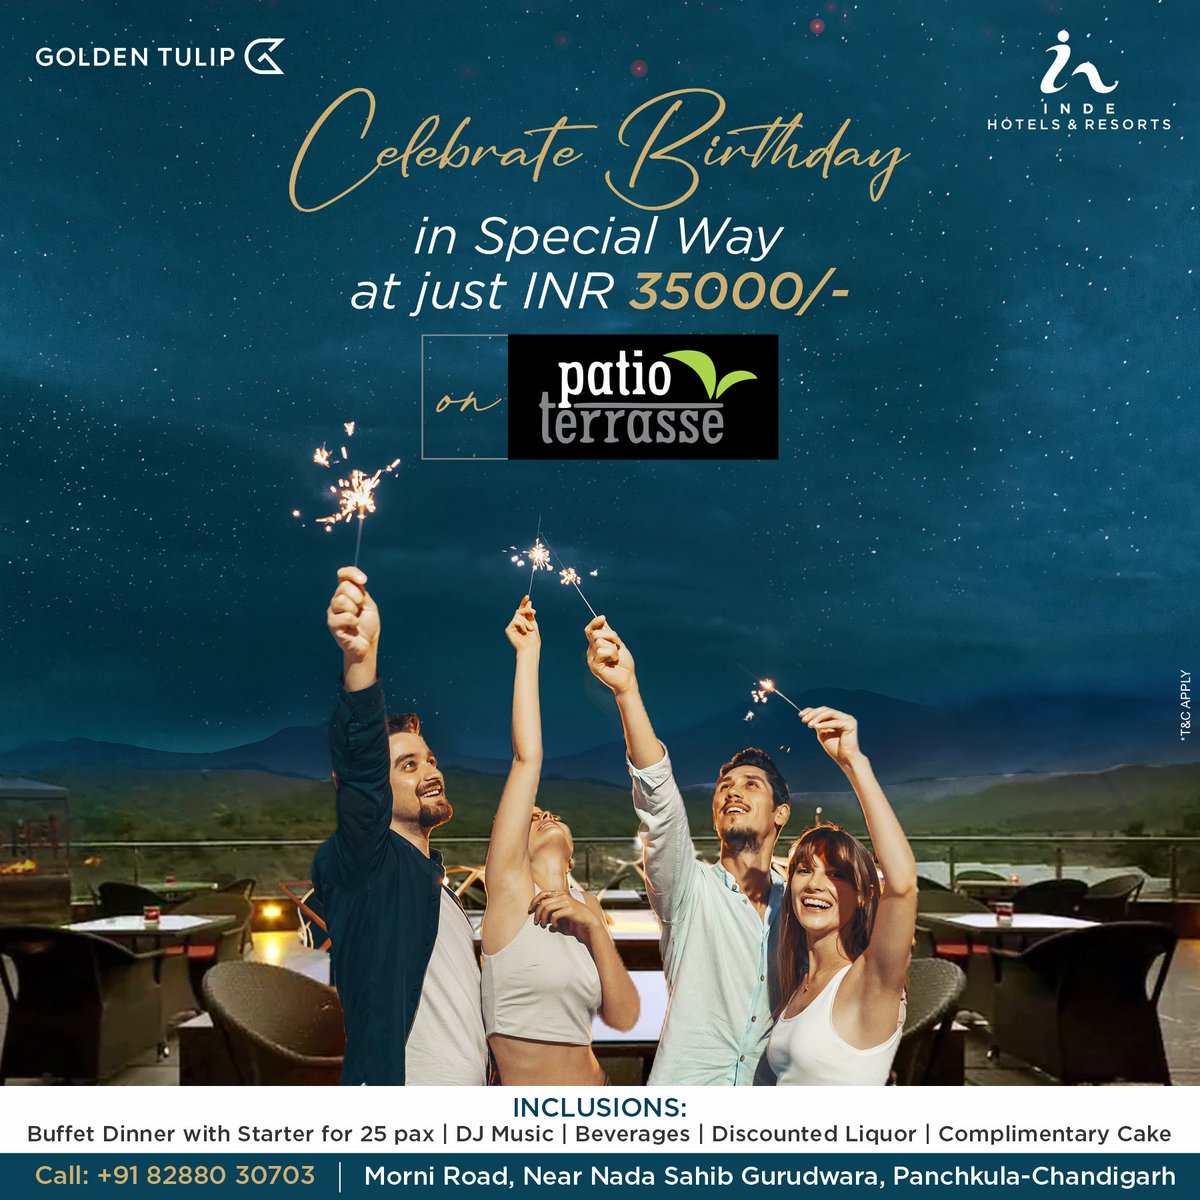 Make your #Birthdays all the more Special with #GoldenTulipChandigarhPanchkula’s Exclusive #CelebrationPackage of just ₹35000/- inclusive of 
#BuffetDinner with Starter for 25 pax. #DJ, #Beverages, #ComplimentaryCake.
#BookNow:  +91 82880 30703.
#PartyDestination #HotelResort